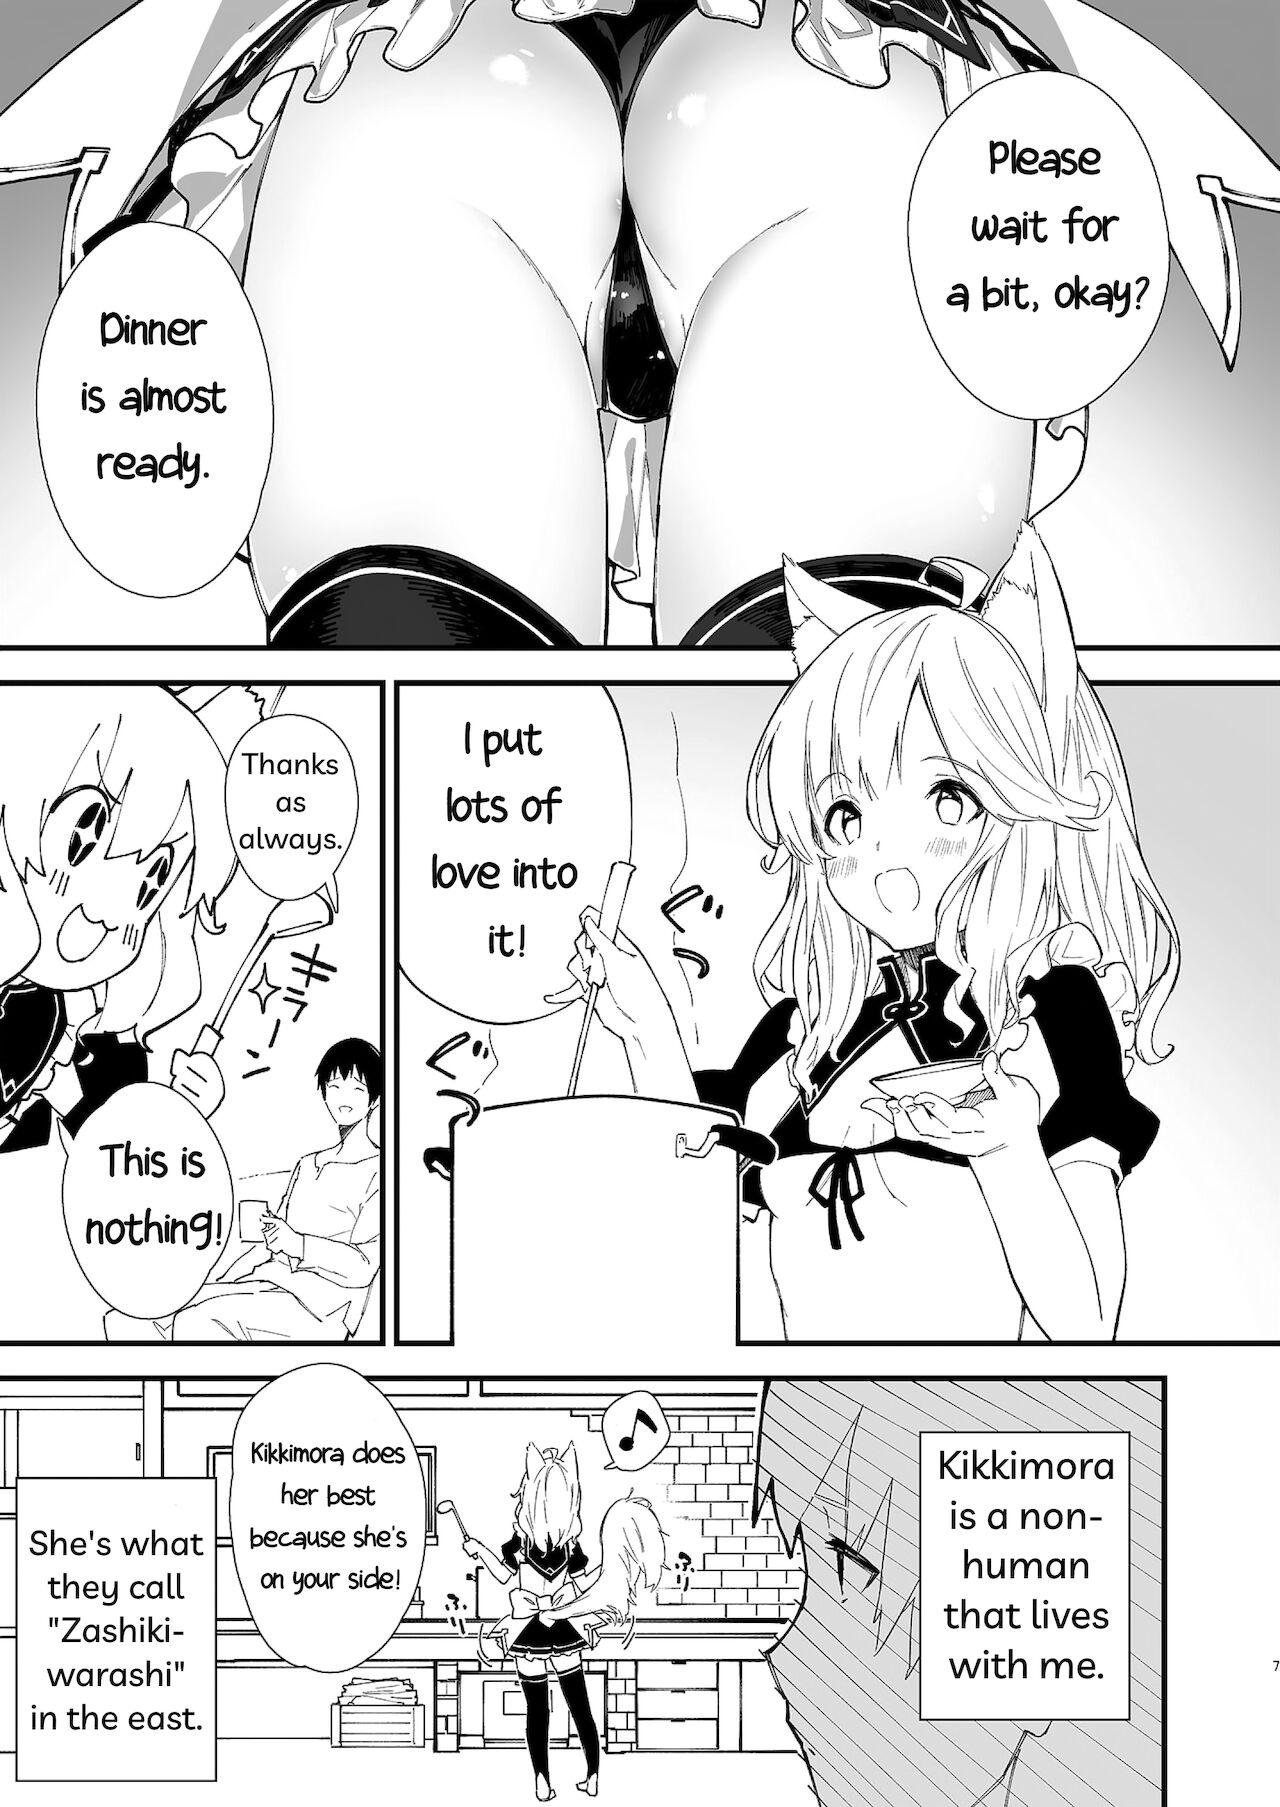 Kemomimi Maid to Ichaicha suru Hon | A Book about making out with a Kemonomimi Maid 4